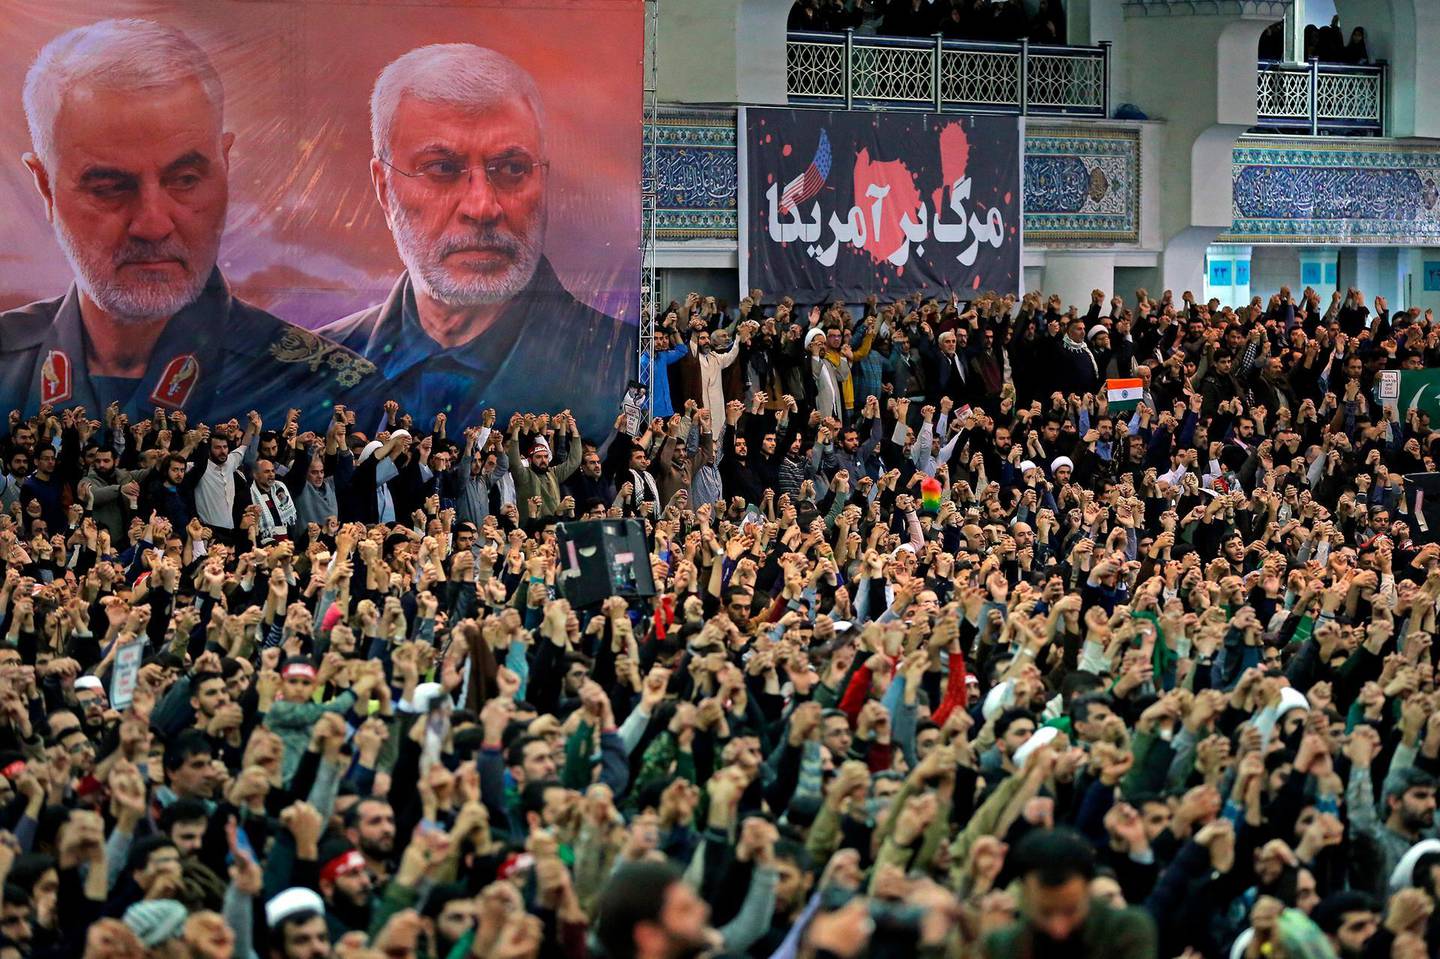 FILE - In this Jan. 17, 2020 file photo, released by the official website of the office of the Iranian supreme leader, worshippers chant slogans during Friday prayers ceremony, as a banner show Iranian Revolutionary Guard Gen. Qassem Soleimani, left, and Iraqi Shiite senior militia commander Abu Mahdi al-Muhandis, who were killed in Iraq in a U.S. drone attack on Jan. 3, and a banner which reads in Persian: "Death To America, "at Imam Khomeini Grand Mosque in Tehran, Iran. On Thursday, Jan. 7, 2021, Iraqâ€™s judiciary issued an arrest warrant for outgoing U.S. President Donald Trump in connection with the killing of Soleimani and a al-Muhandis last year. The warrant was issued by a judge in Baghdadâ€™s investigative court tasked with probing the Washington-directed drone strike, the courtâ€™s media office said. (Office of the Iranian Supreme Leader via AP, File)